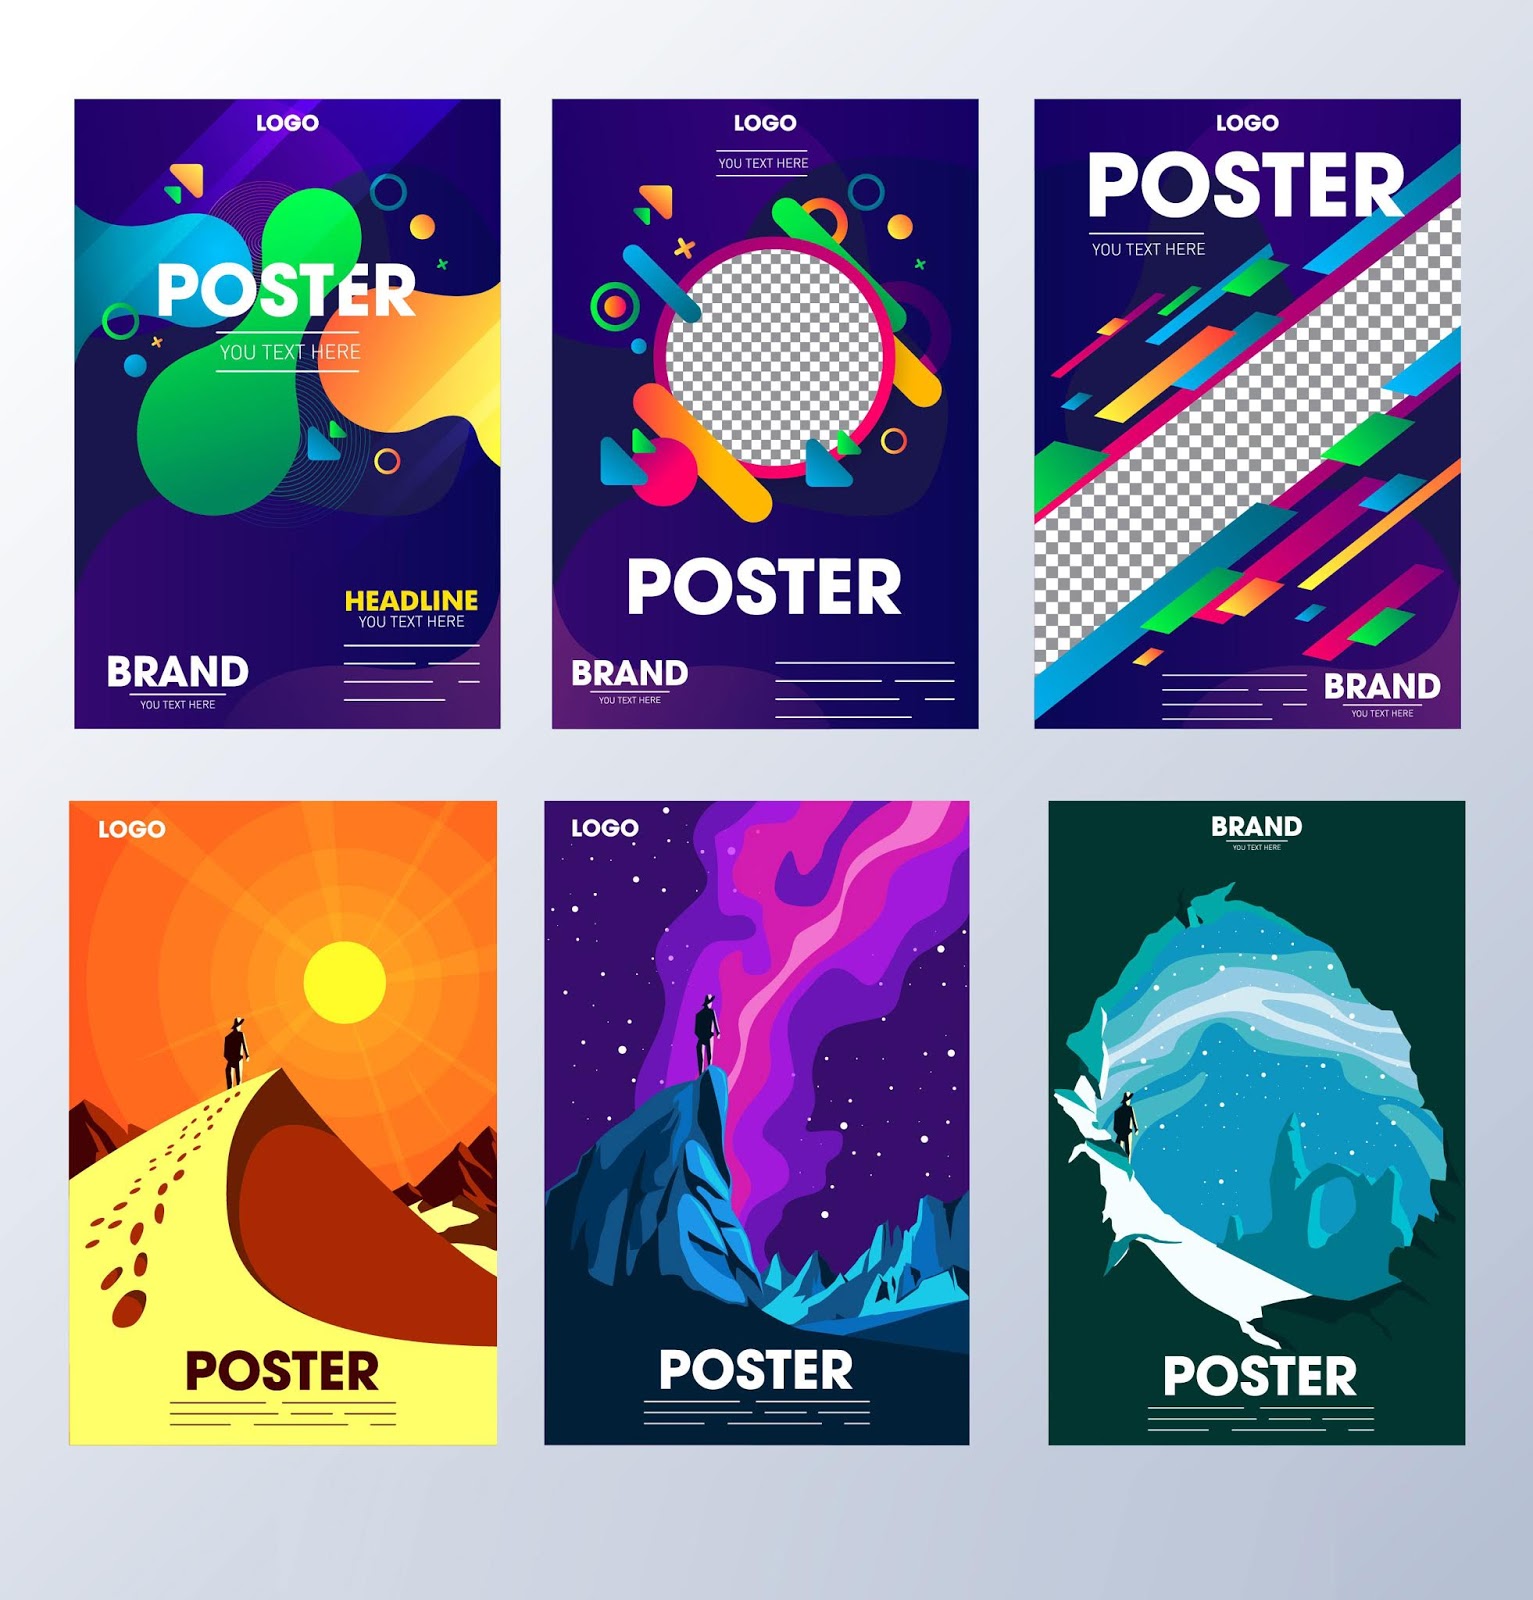 Download Poster Templates Colorful Abstract Adventure Themes Free Vector Vectorkh PSD Mockup Templates